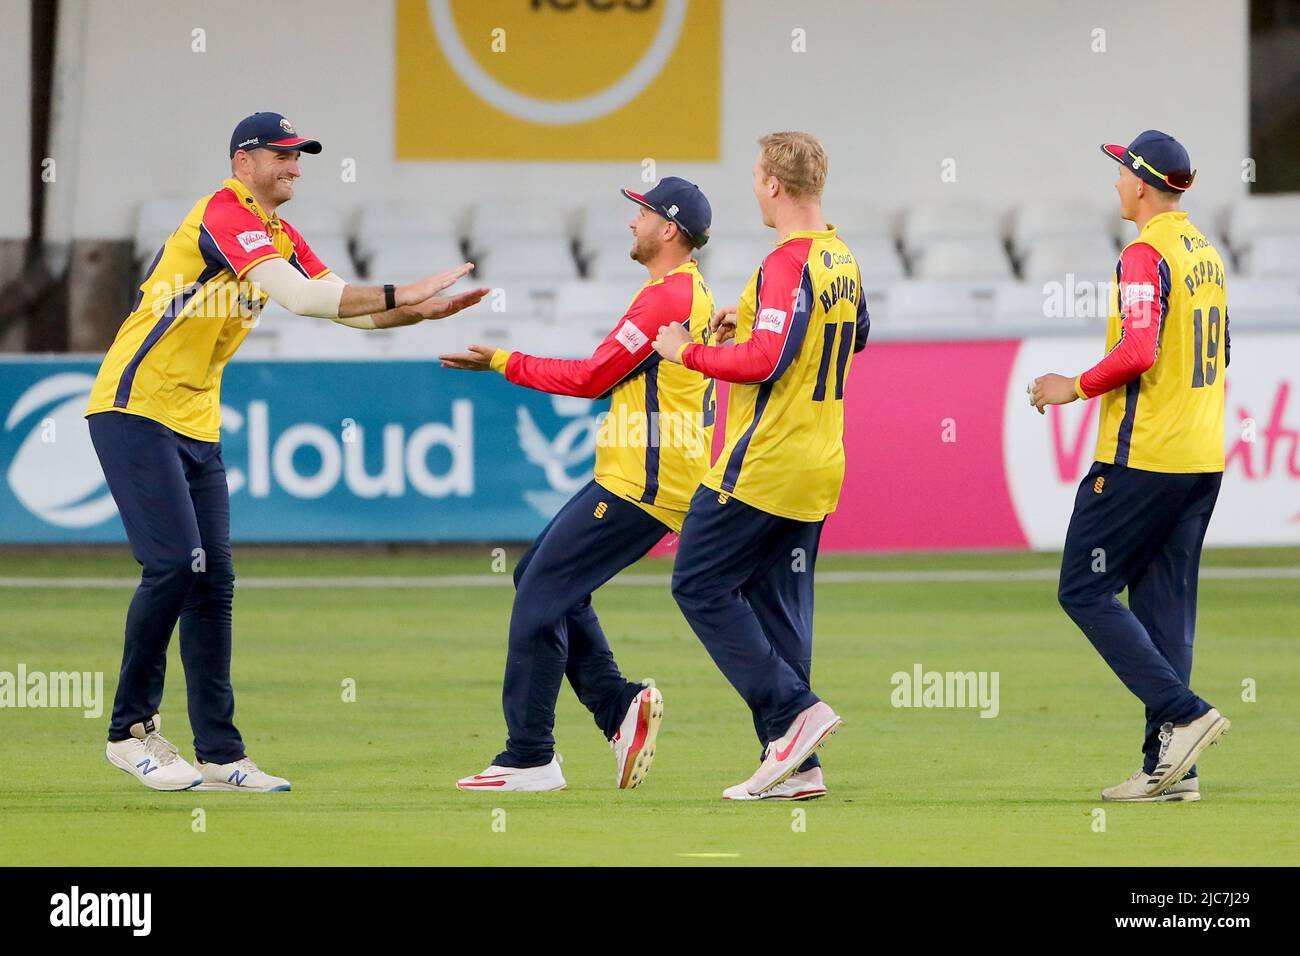 Simon Harmer of Essex celebrates with his team mates after taking the wicket of John Simpson during Essex Eagles vs Middlesex, Vitality Blast T20 Cric Stock Photo